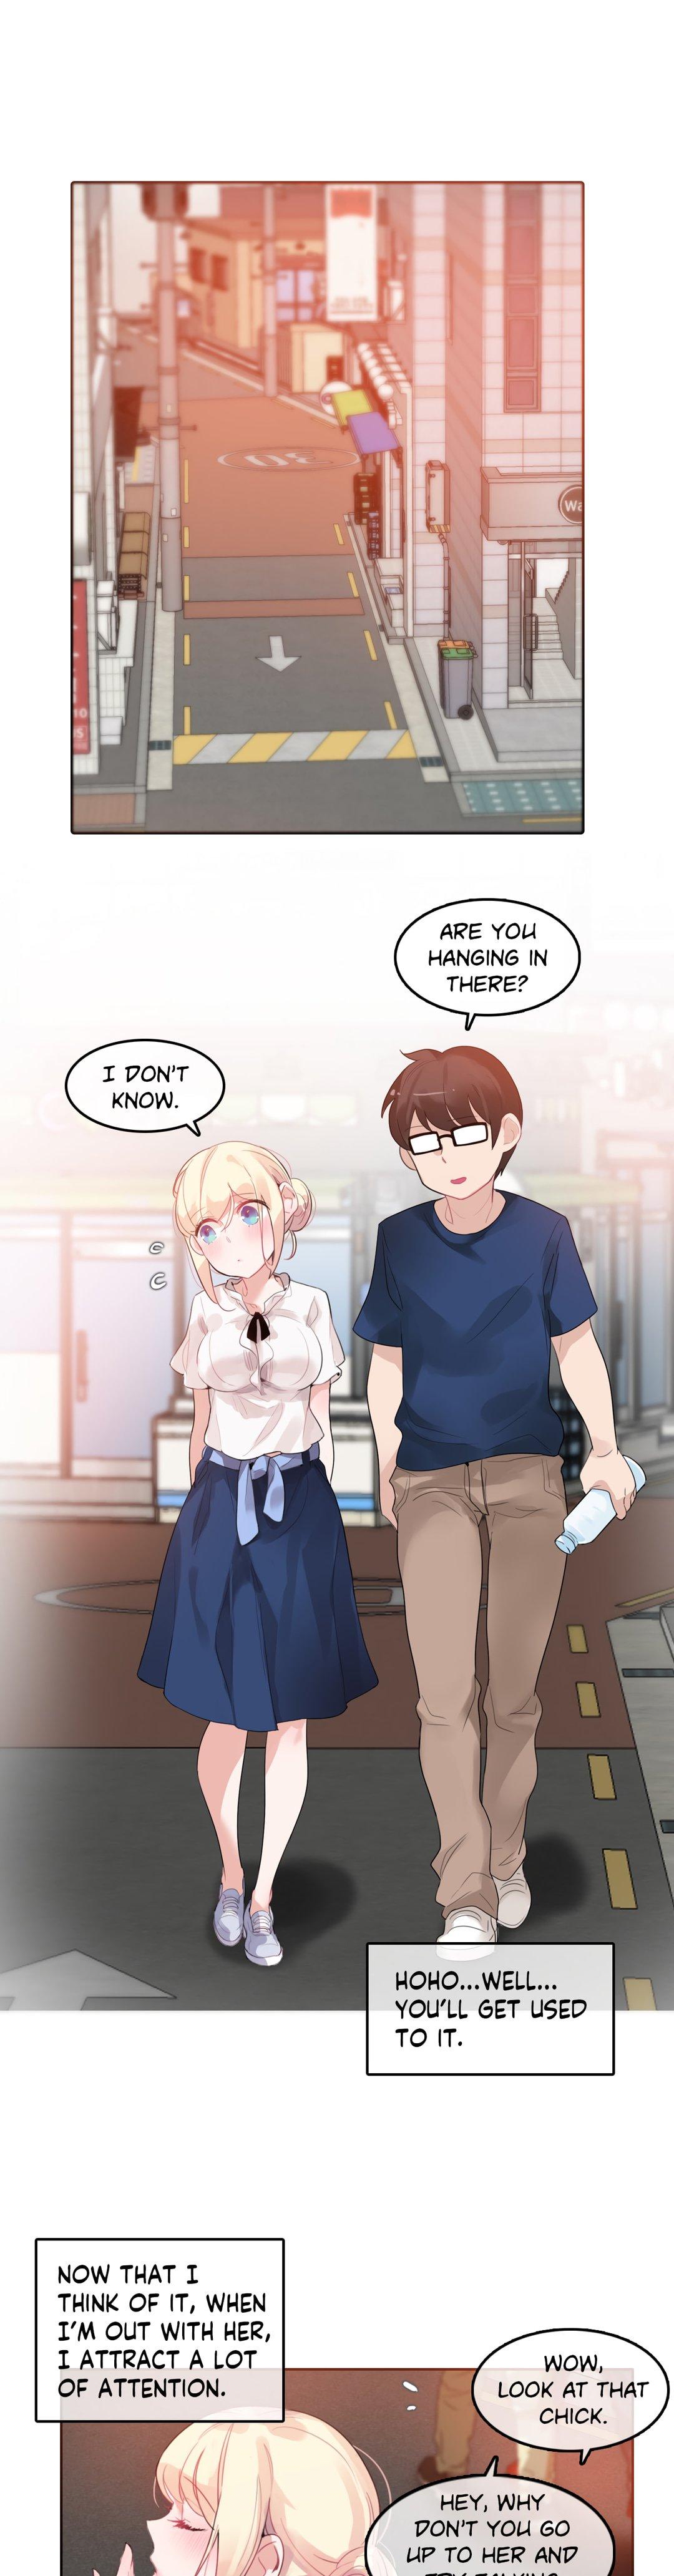 A Pervert's Daily Life • Chapter 31-35 94